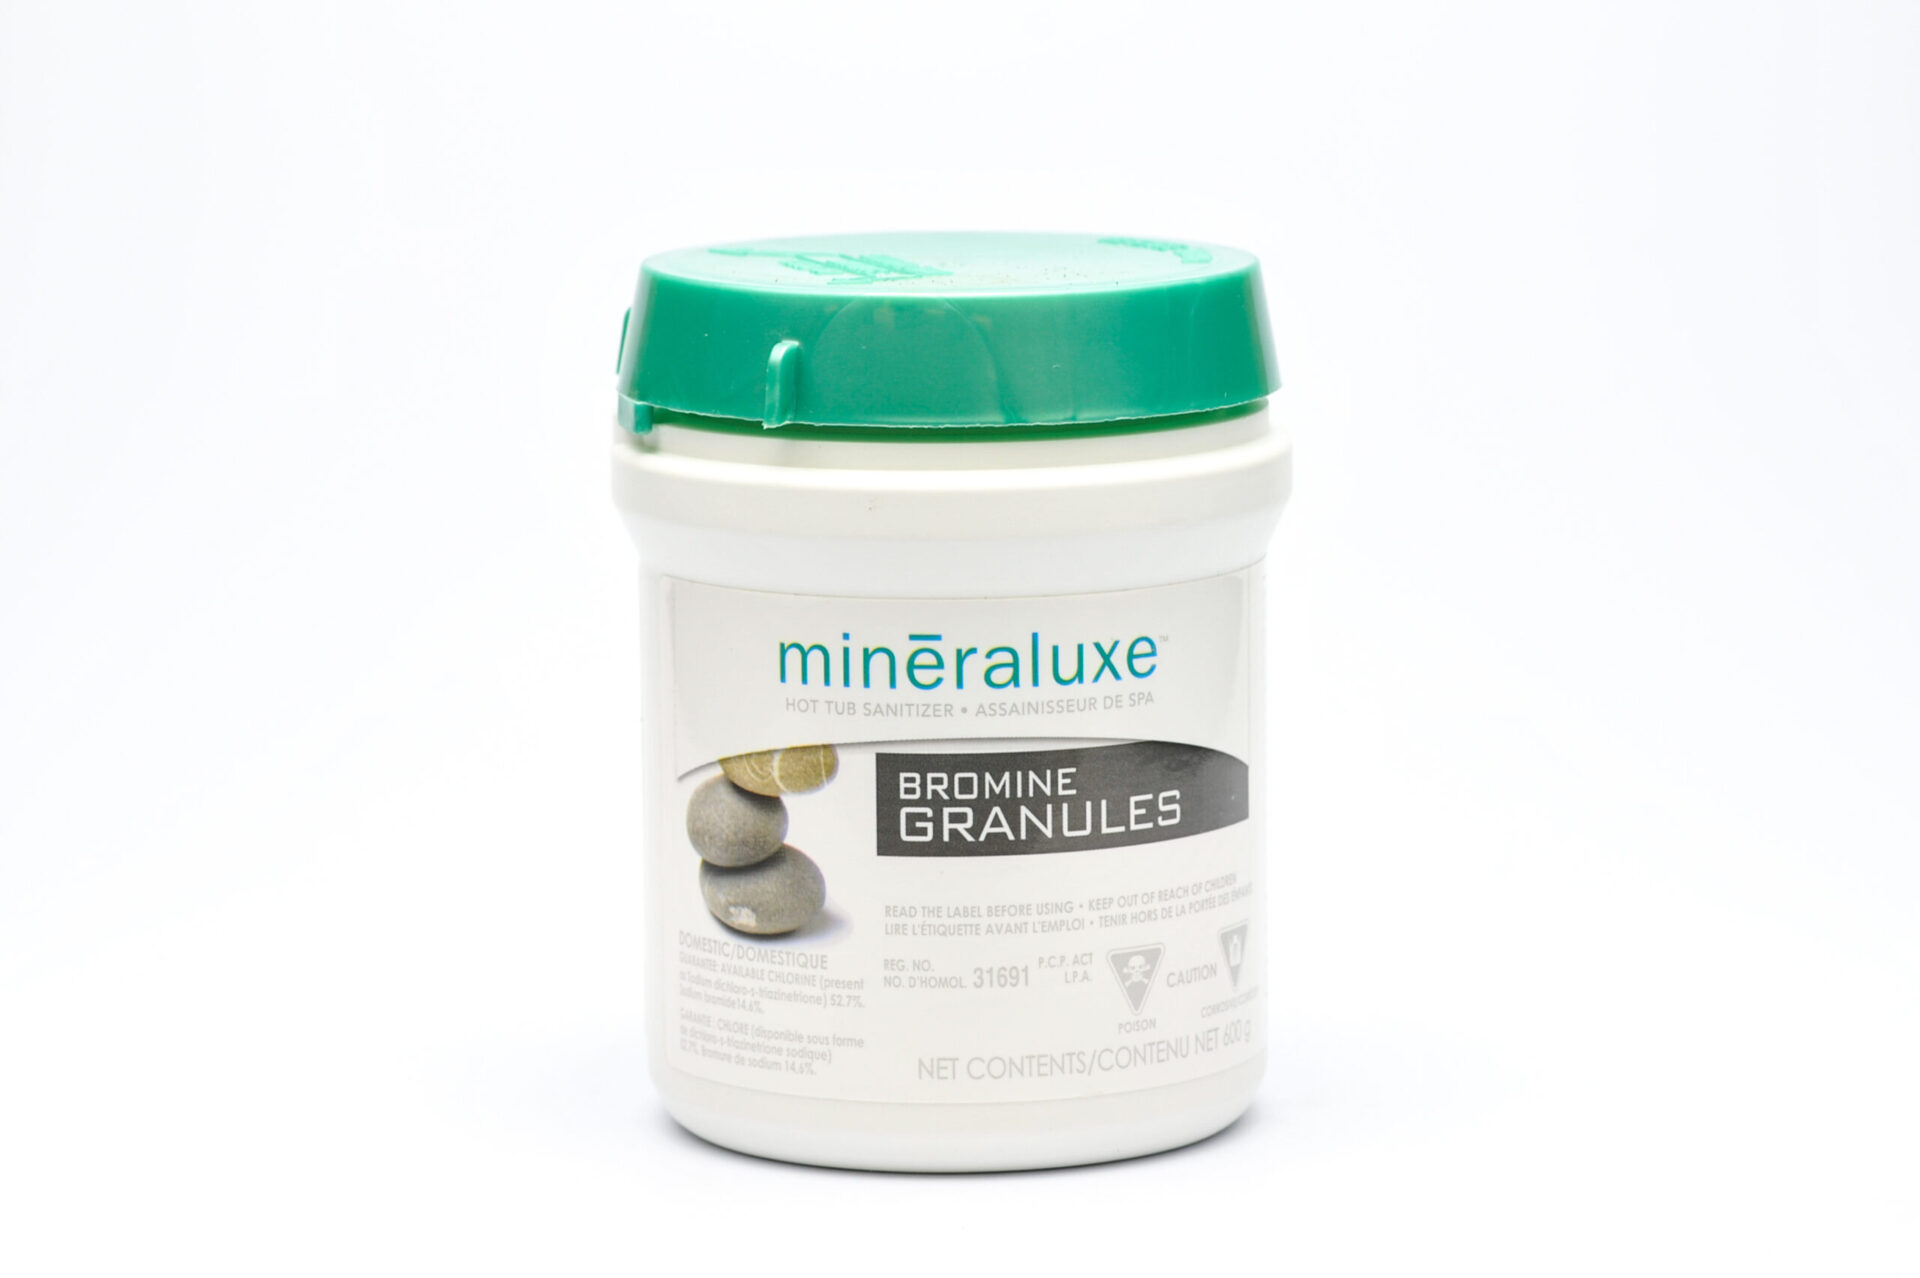 Mineraluxe Bromine Granules 600g scaled - MINERALUXE BROMINE GRANULES - 600g